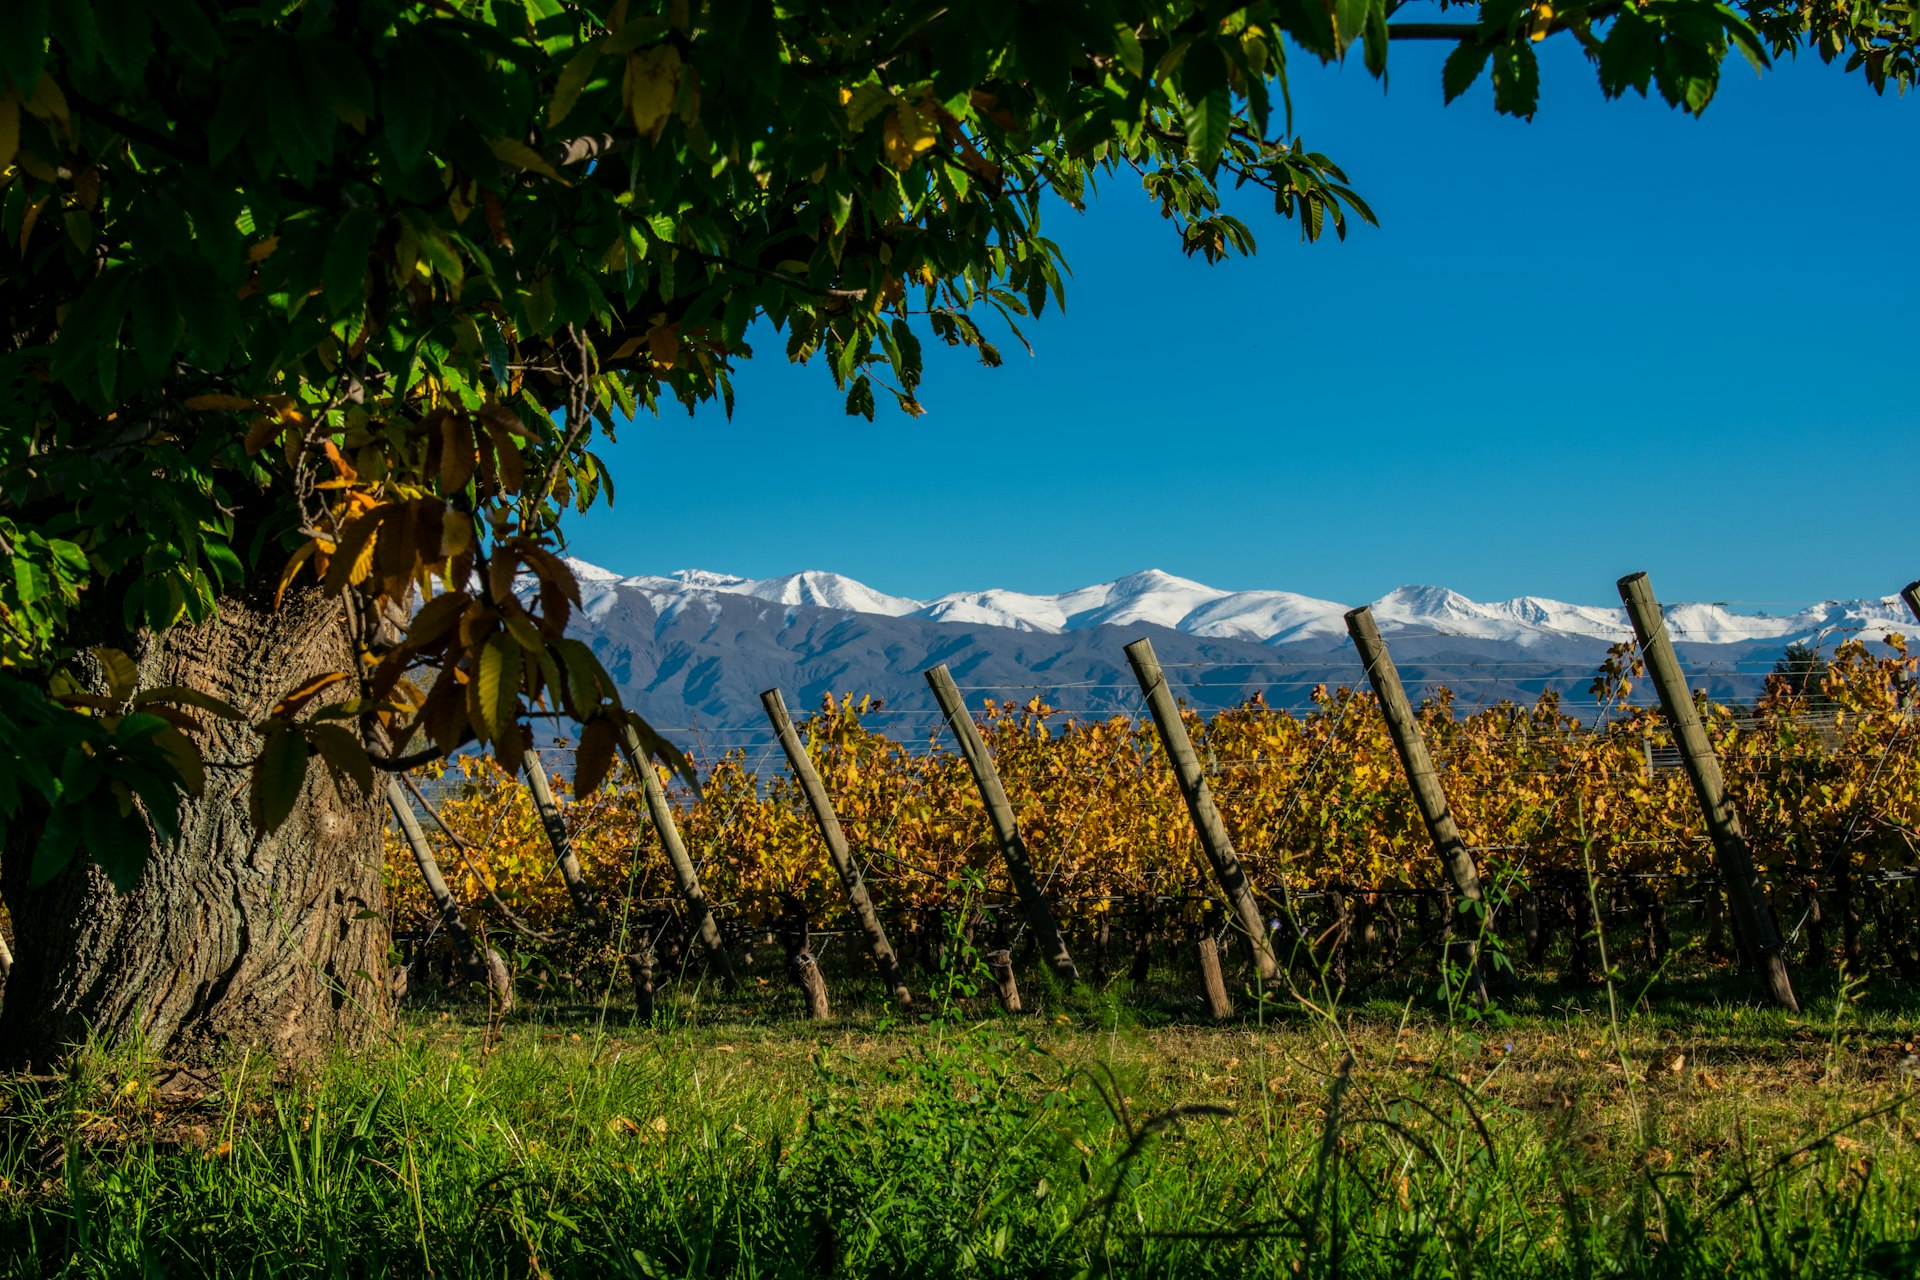 vineyards next to the Andes mountain range in Mendoza Argentina